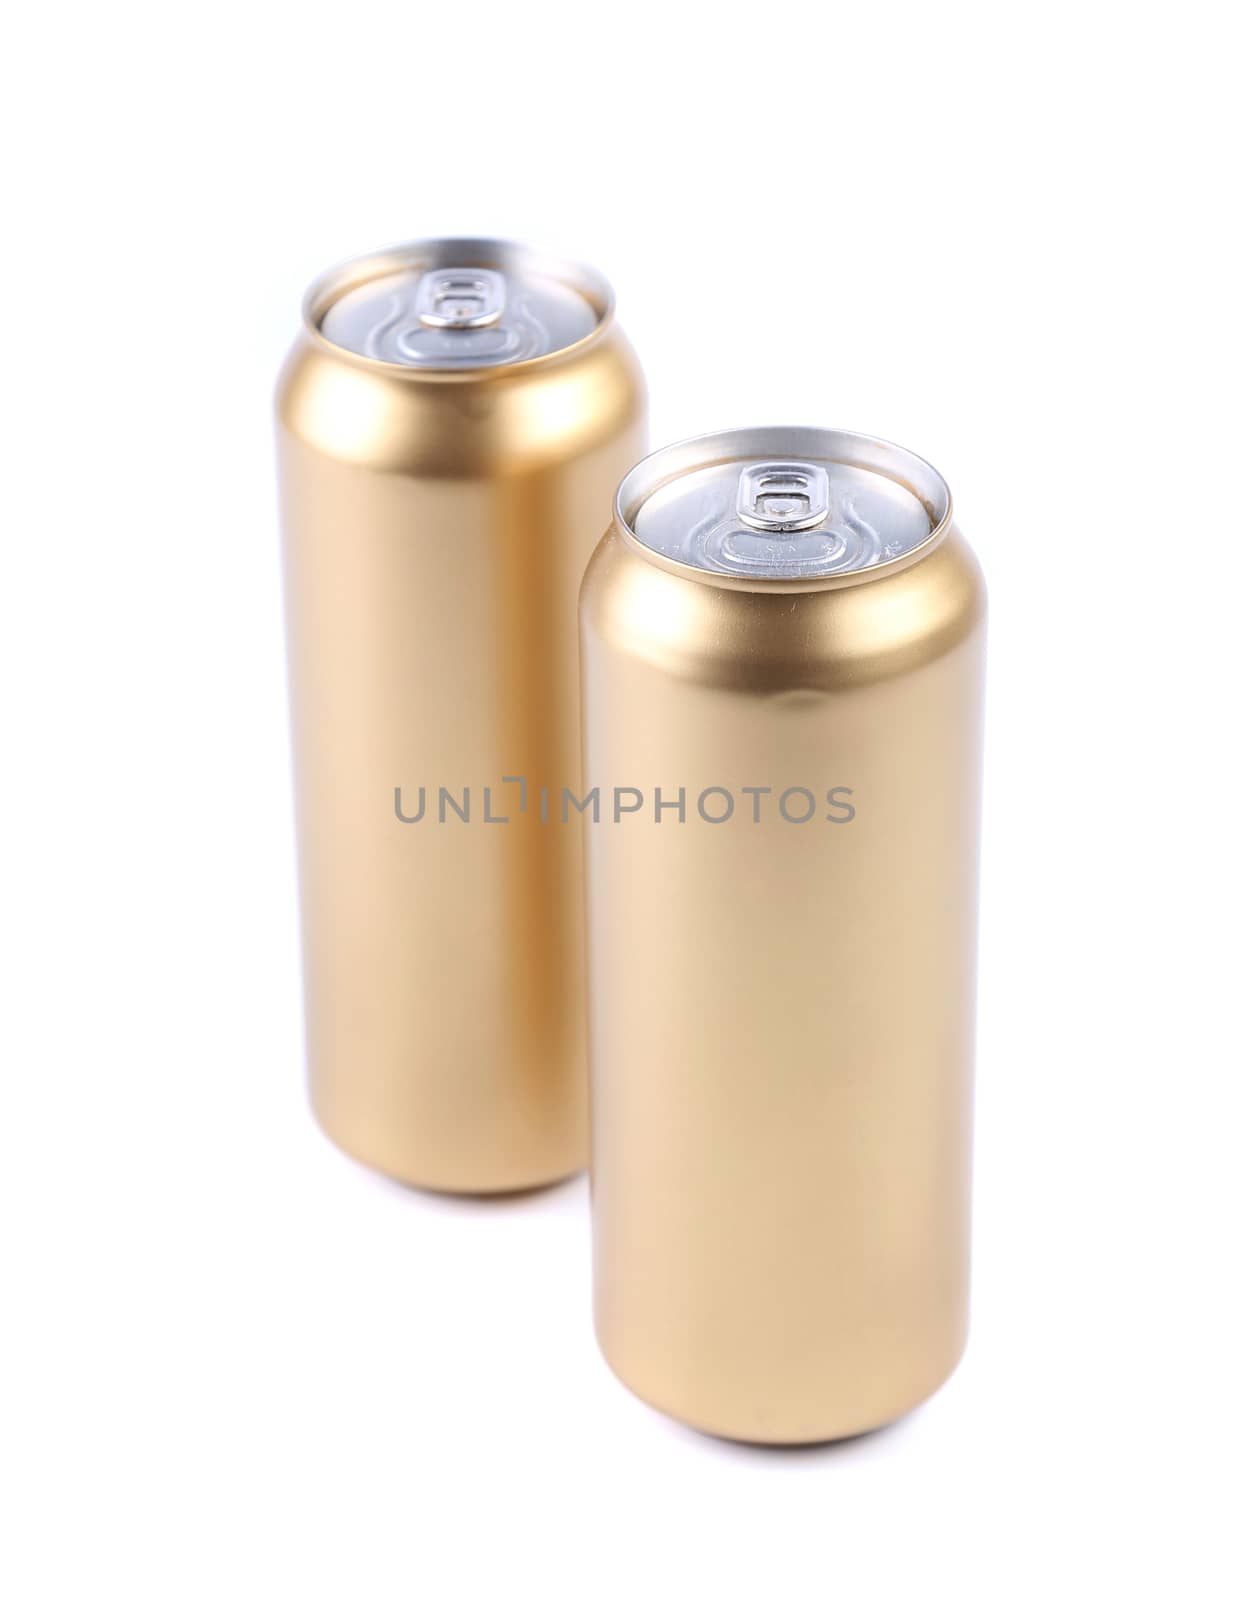 Blanks aluminum and golden soda cans. White background.